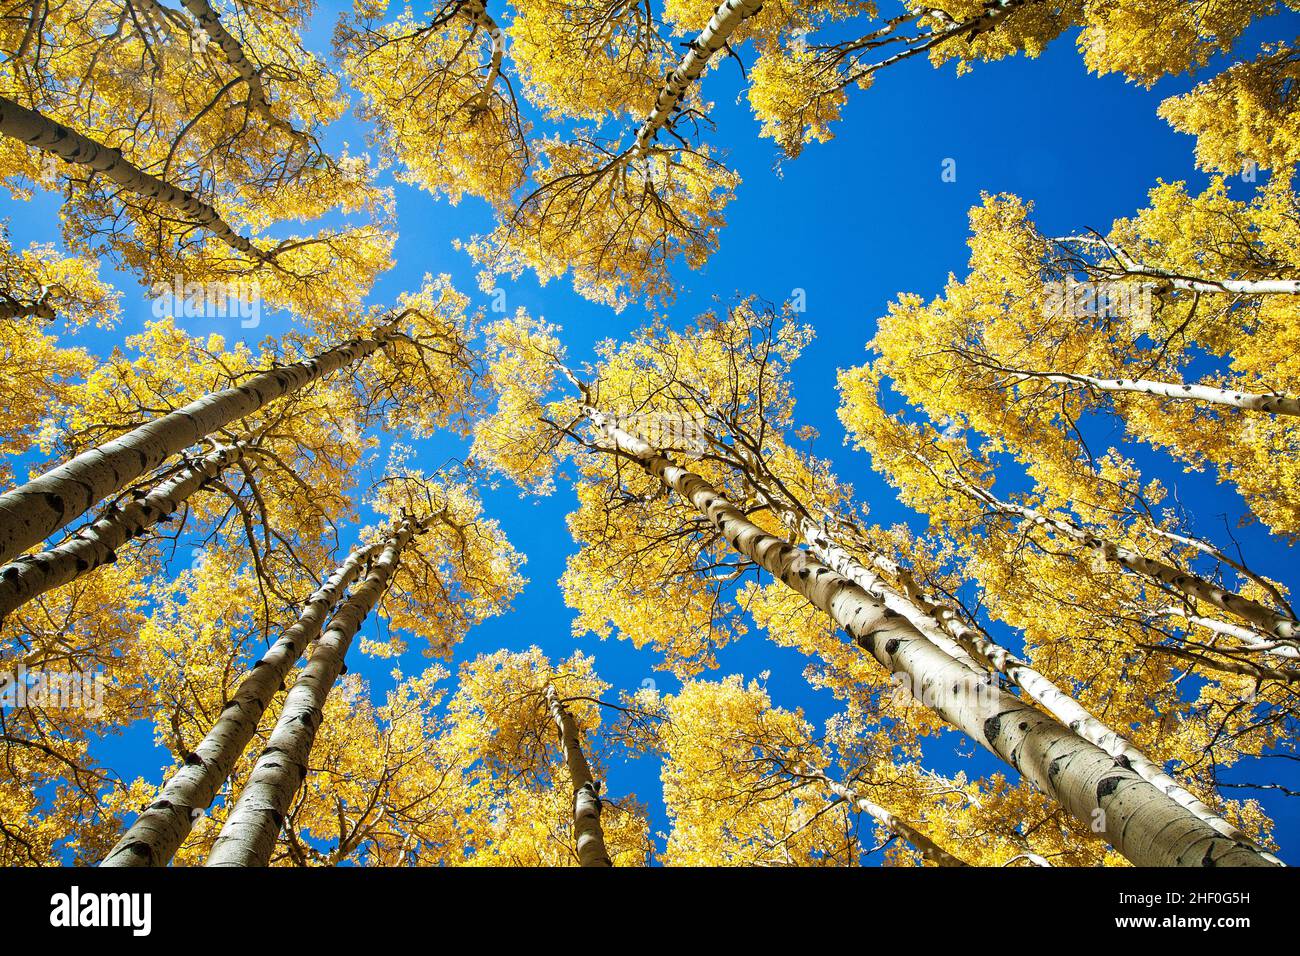 Aspens reach into the sky and show their fall color in the mountains near Flagstaff, Arizona. Stock Photo